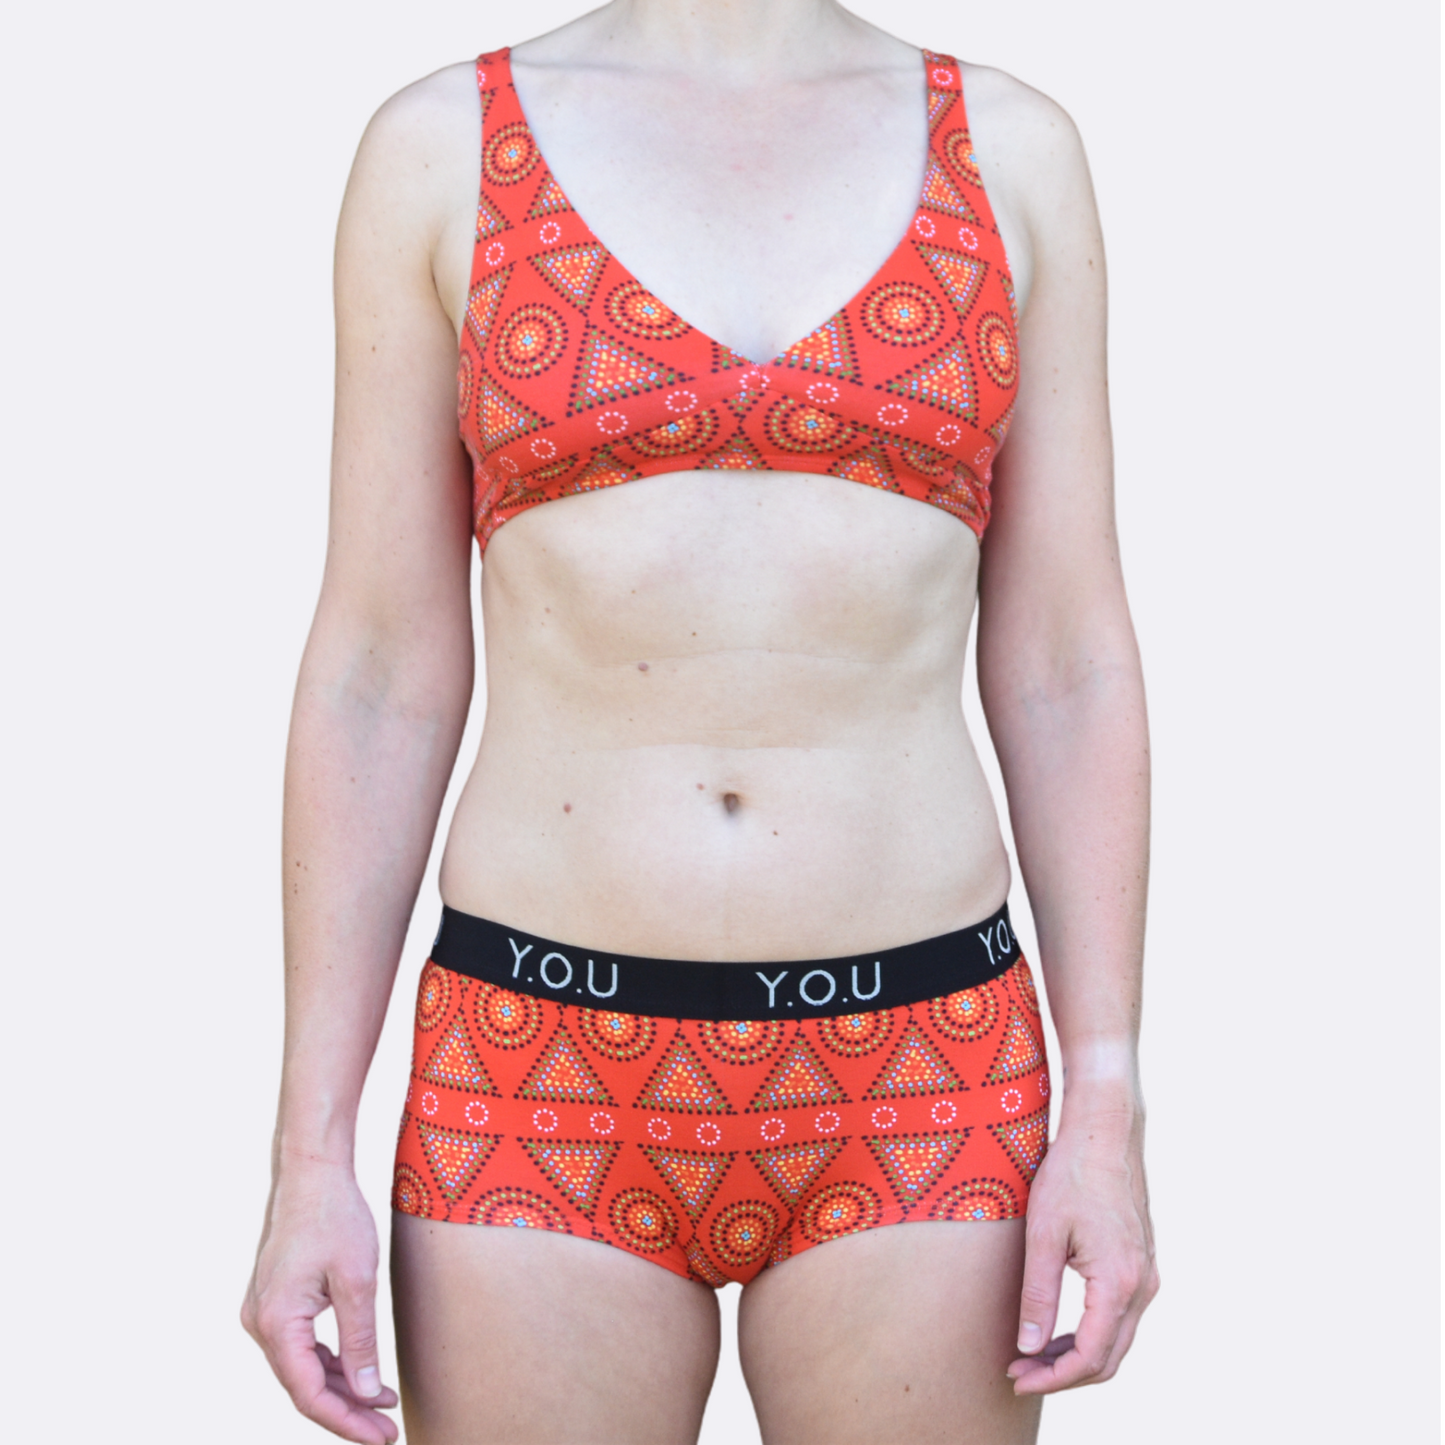 A light skinned woman wears our organic cotton Red Mara bralette and y.o.u branded boy shorts matching set - front view